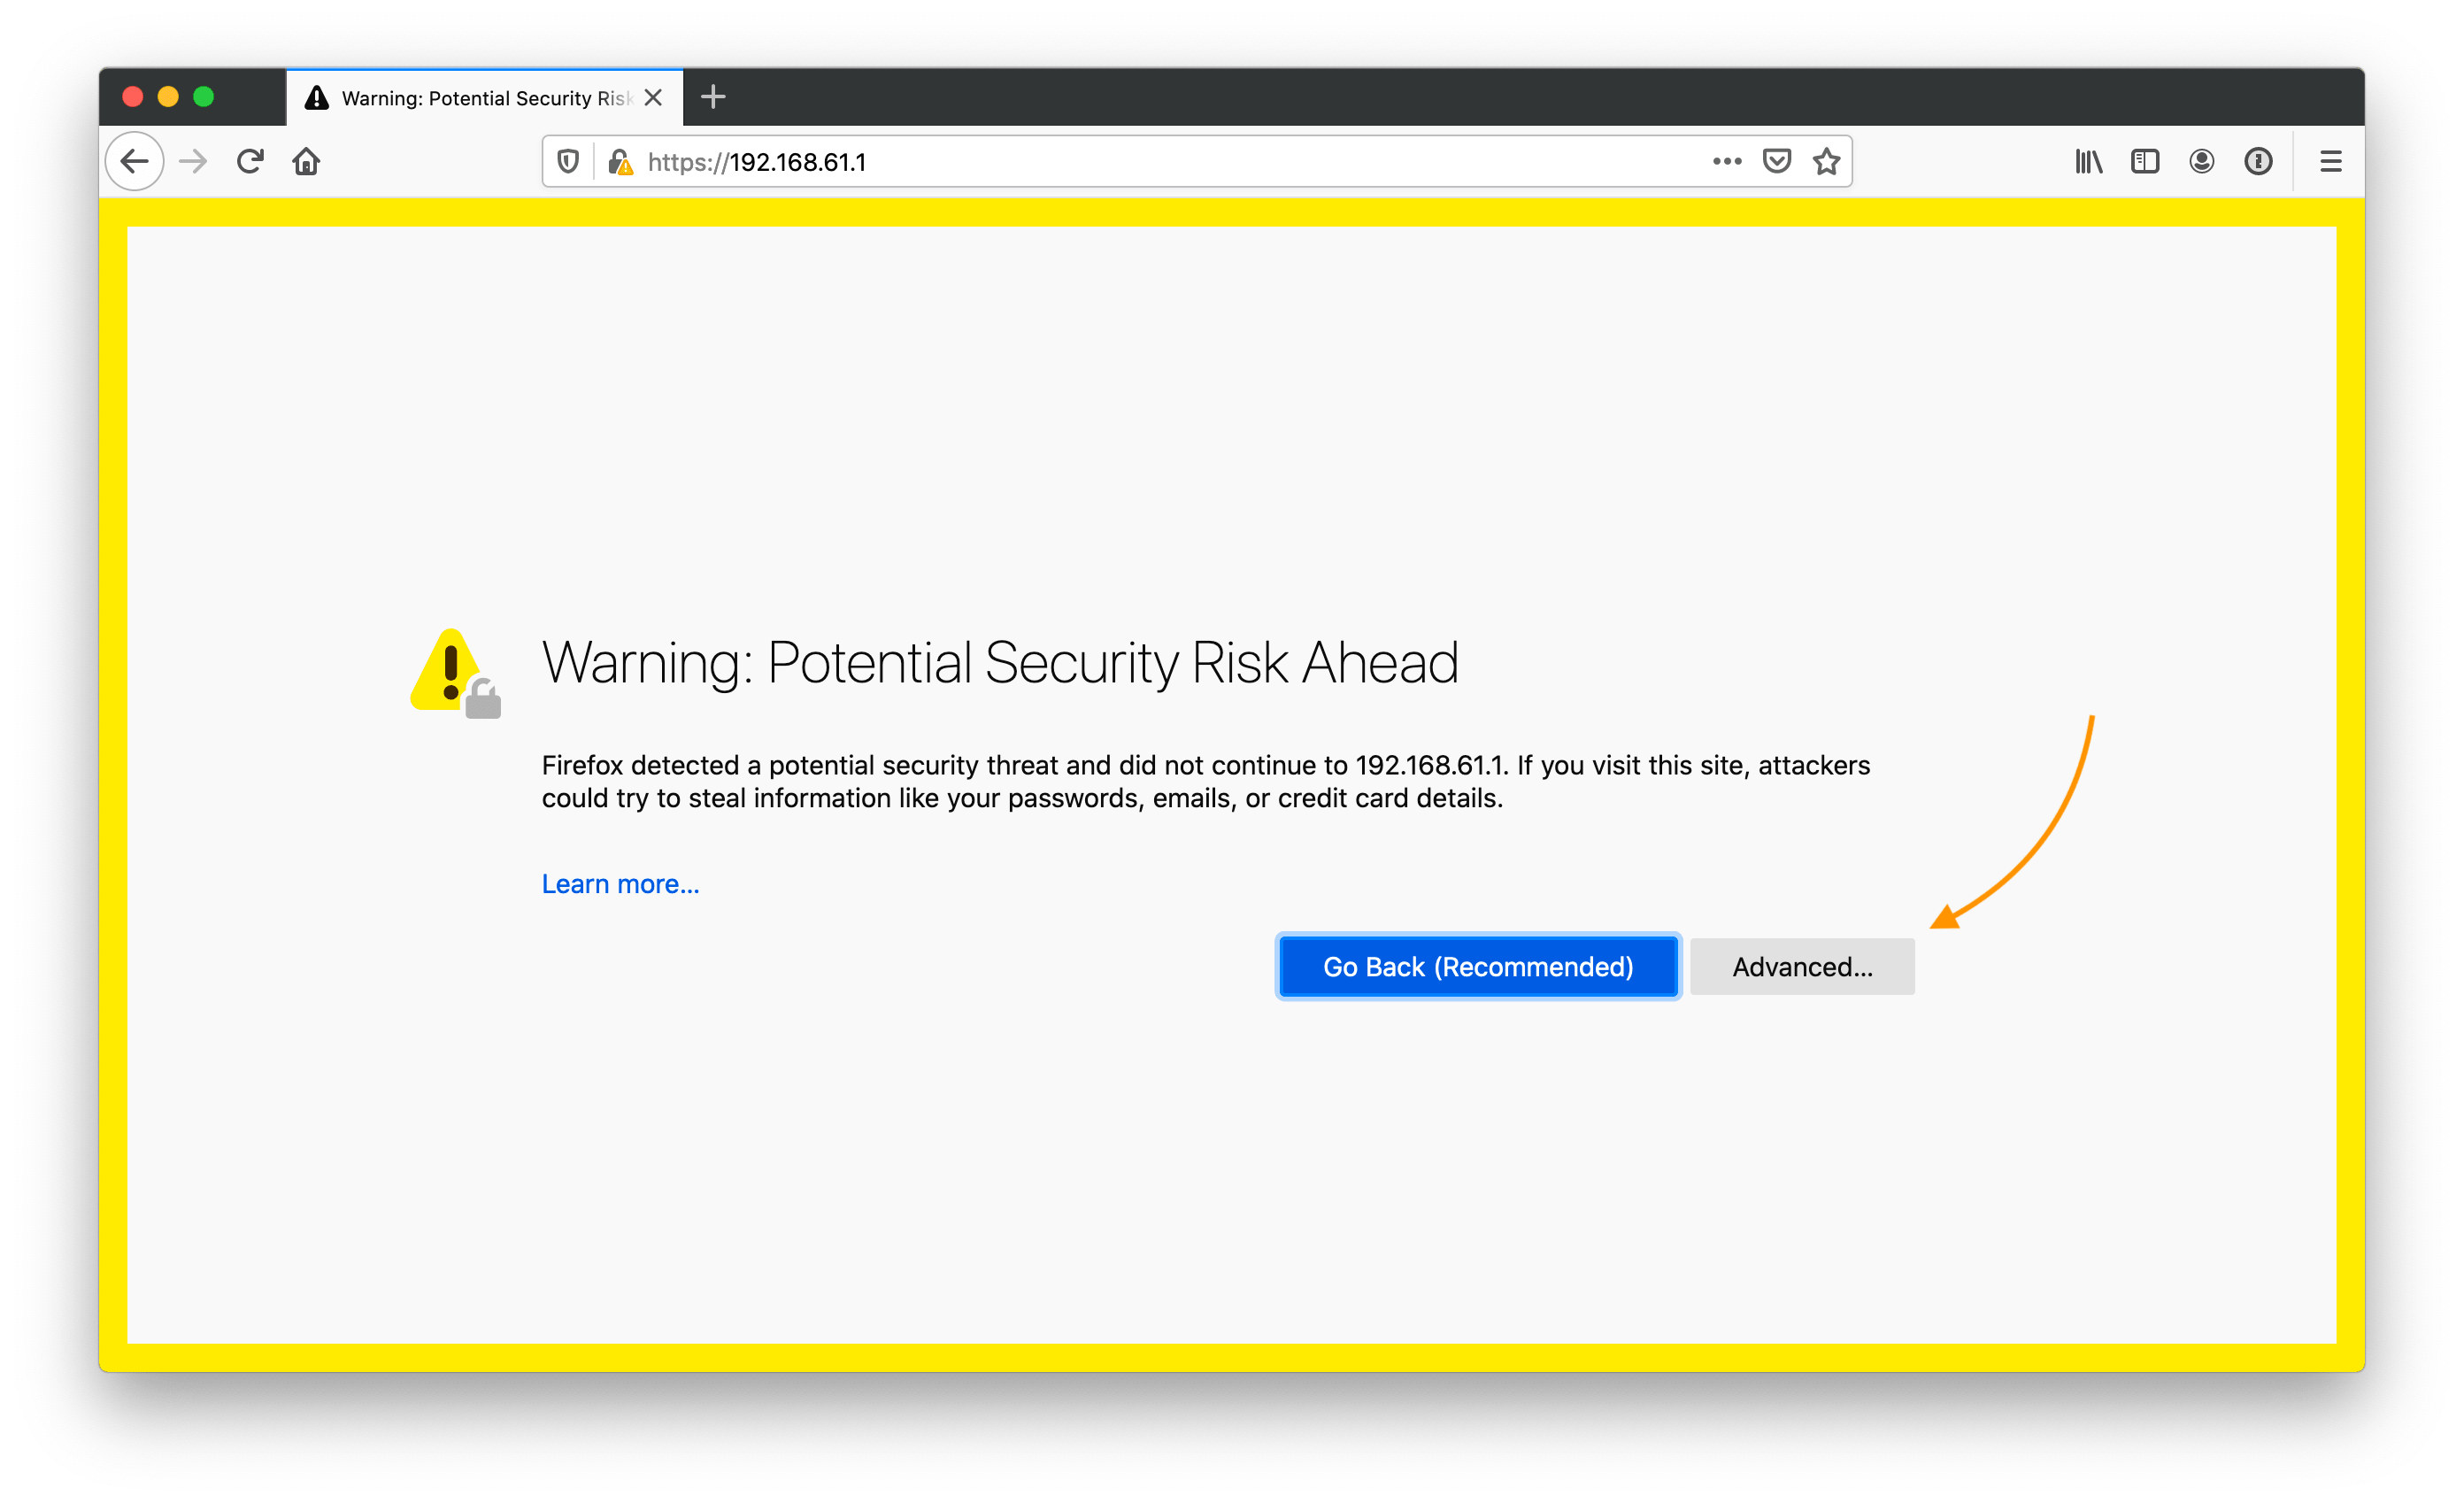 Firefox warning potential security risk ahead